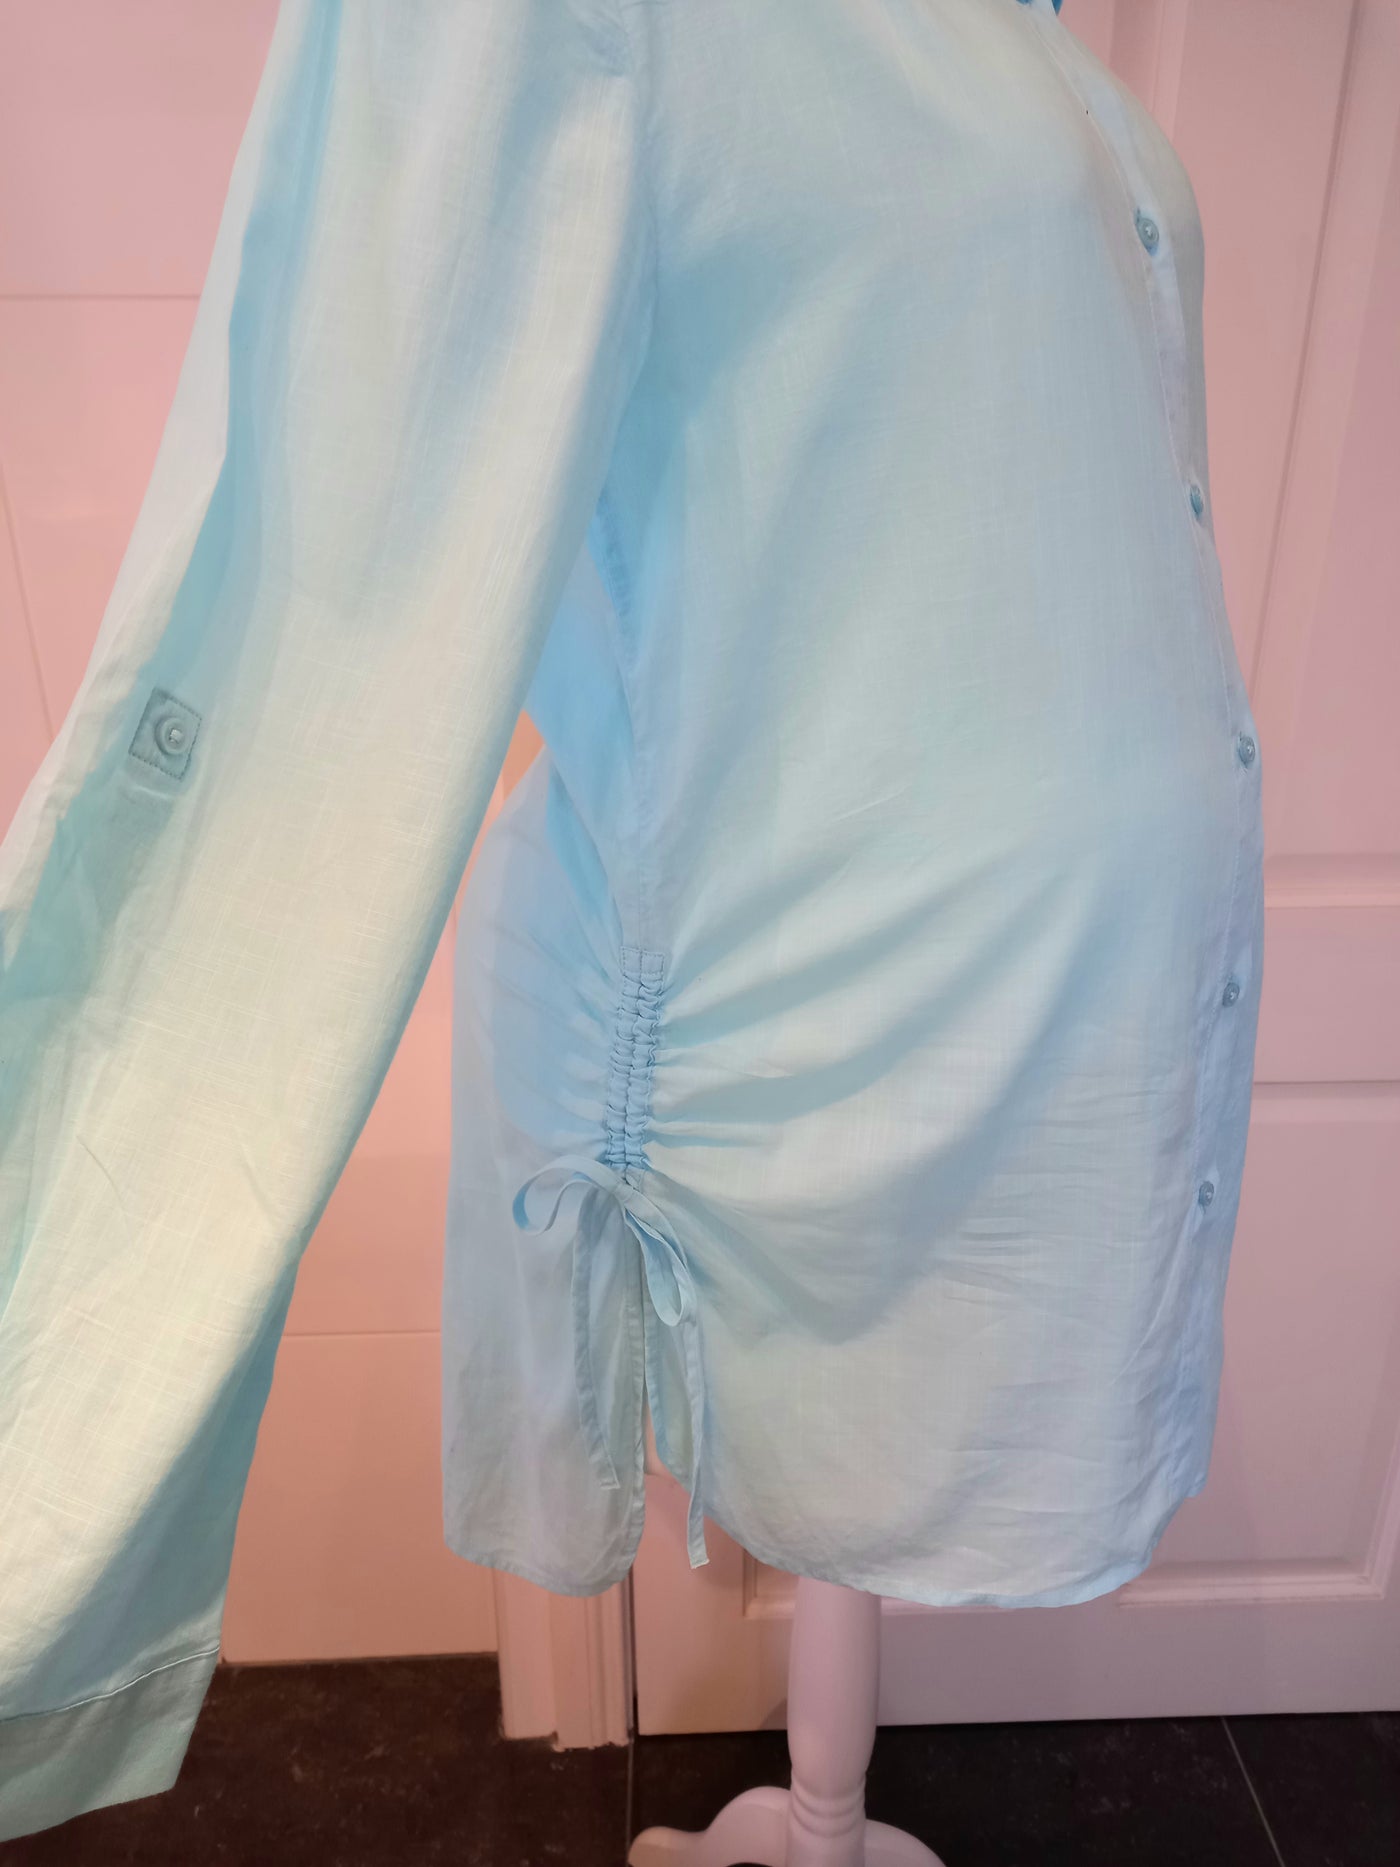 Dunnes Long Length Turquoise Shirt - Size S (approx UK 8/10)